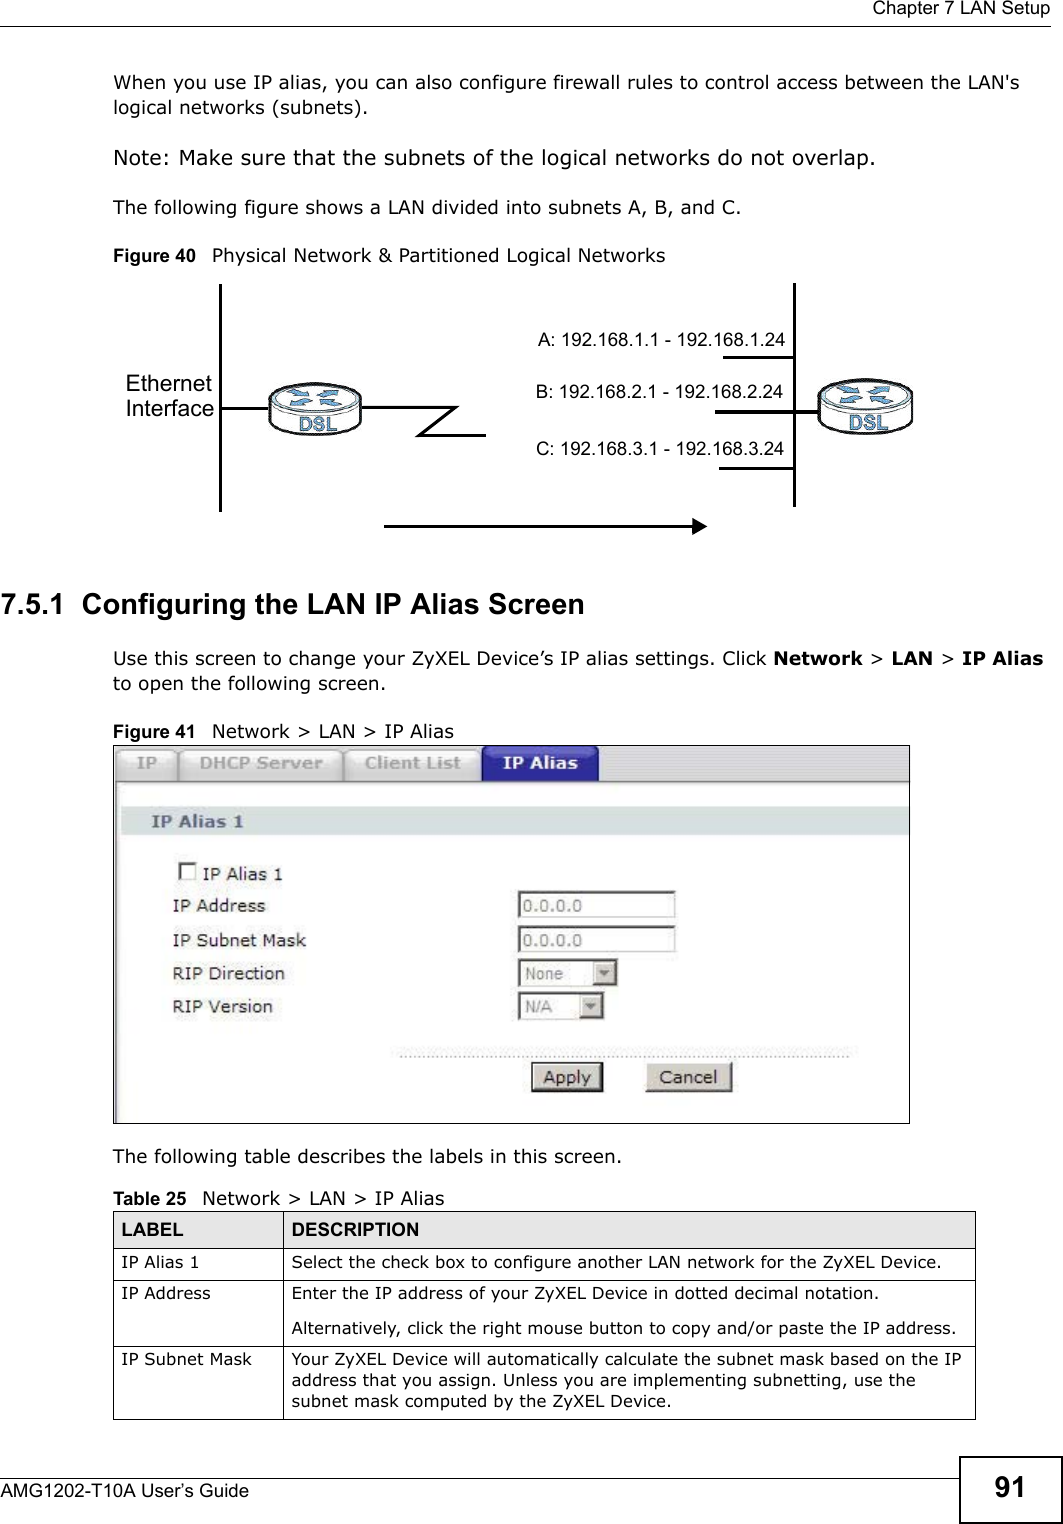  Chapter 7 LAN SetupAMG1202-T10A User’s Guide 91When you use IP alias, you can also configure firewall rules to control access between the LAN&apos;s logical networks (subnets).Note: Make sure that the subnets of the logical networks do not overlap.The following figure shows a LAN divided into subnets A, B, and C.Figure 40   Physical Network &amp; Partitioned Logical Networks7.5.1  Configuring the LAN IP Alias ScreenUse this screen to change your ZyXEL Device’s IP alias settings. Click Network &gt; LAN &gt; IP Alias to open the following screen.Figure 41   Network &gt; LAN &gt; IP AliasThe following table describes the labels in this screen. EthernetInterfaceA: 192.168.1.1 - 192.168.1.24B: 192.168.2.1 - 192.168.2.24C: 192.168.3.1 - 192.168.3.24Table 25   Network &gt; LAN &gt; IP Alias LABEL DESCRIPTIONIP Alias 1 Select the check box to configure another LAN network for the ZyXEL Device.IP Address Enter the IP address of your ZyXEL Device in dotted decimal notation. Alternatively, click the right mouse button to copy and/or paste the IP address.IP Subnet Mask Your ZyXEL Device will automatically calculate the subnet mask based on the IP address that you assign. Unless you are implementing subnetting, use the subnet mask computed by the ZyXEL Device.